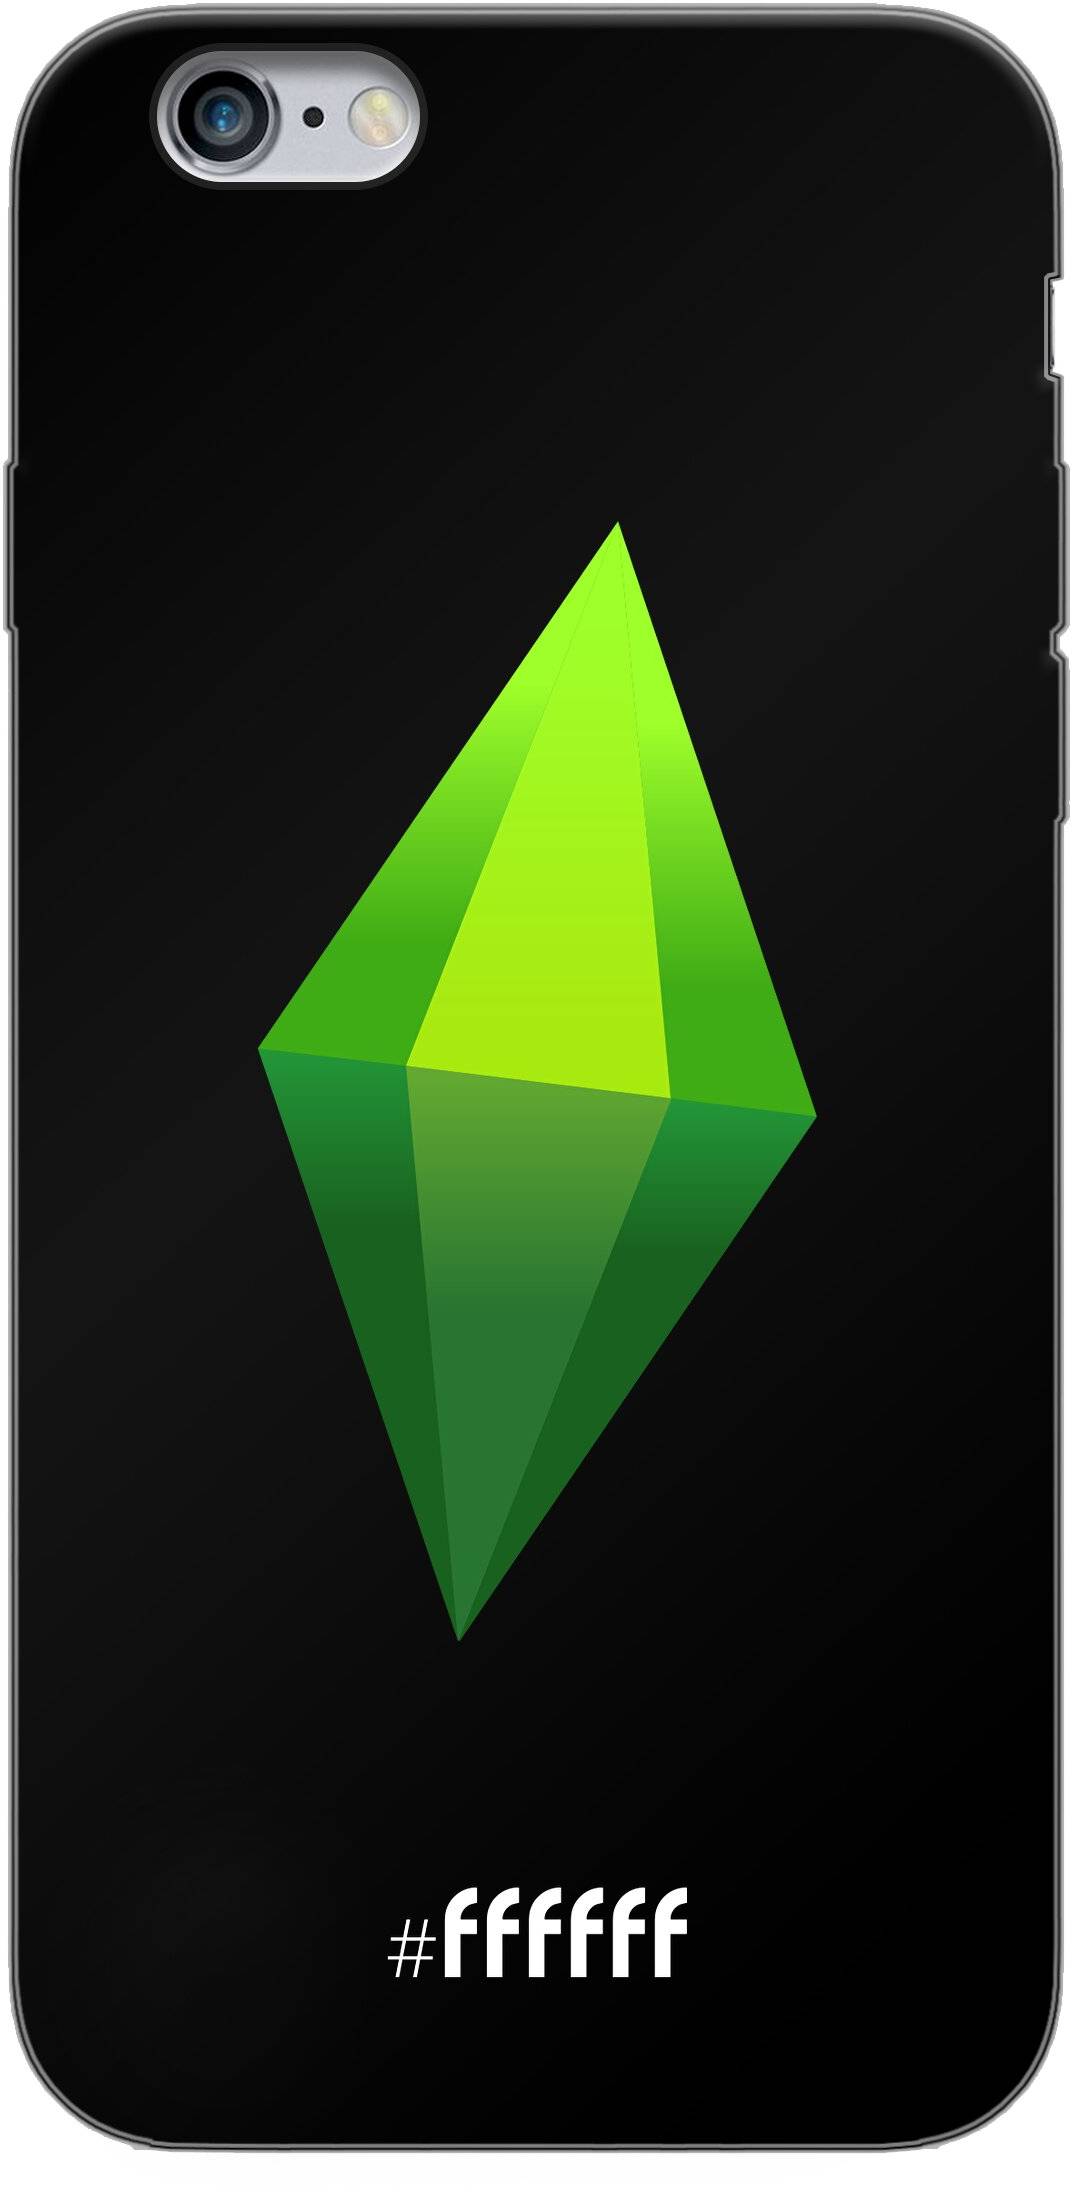 The Sims iPhone 6